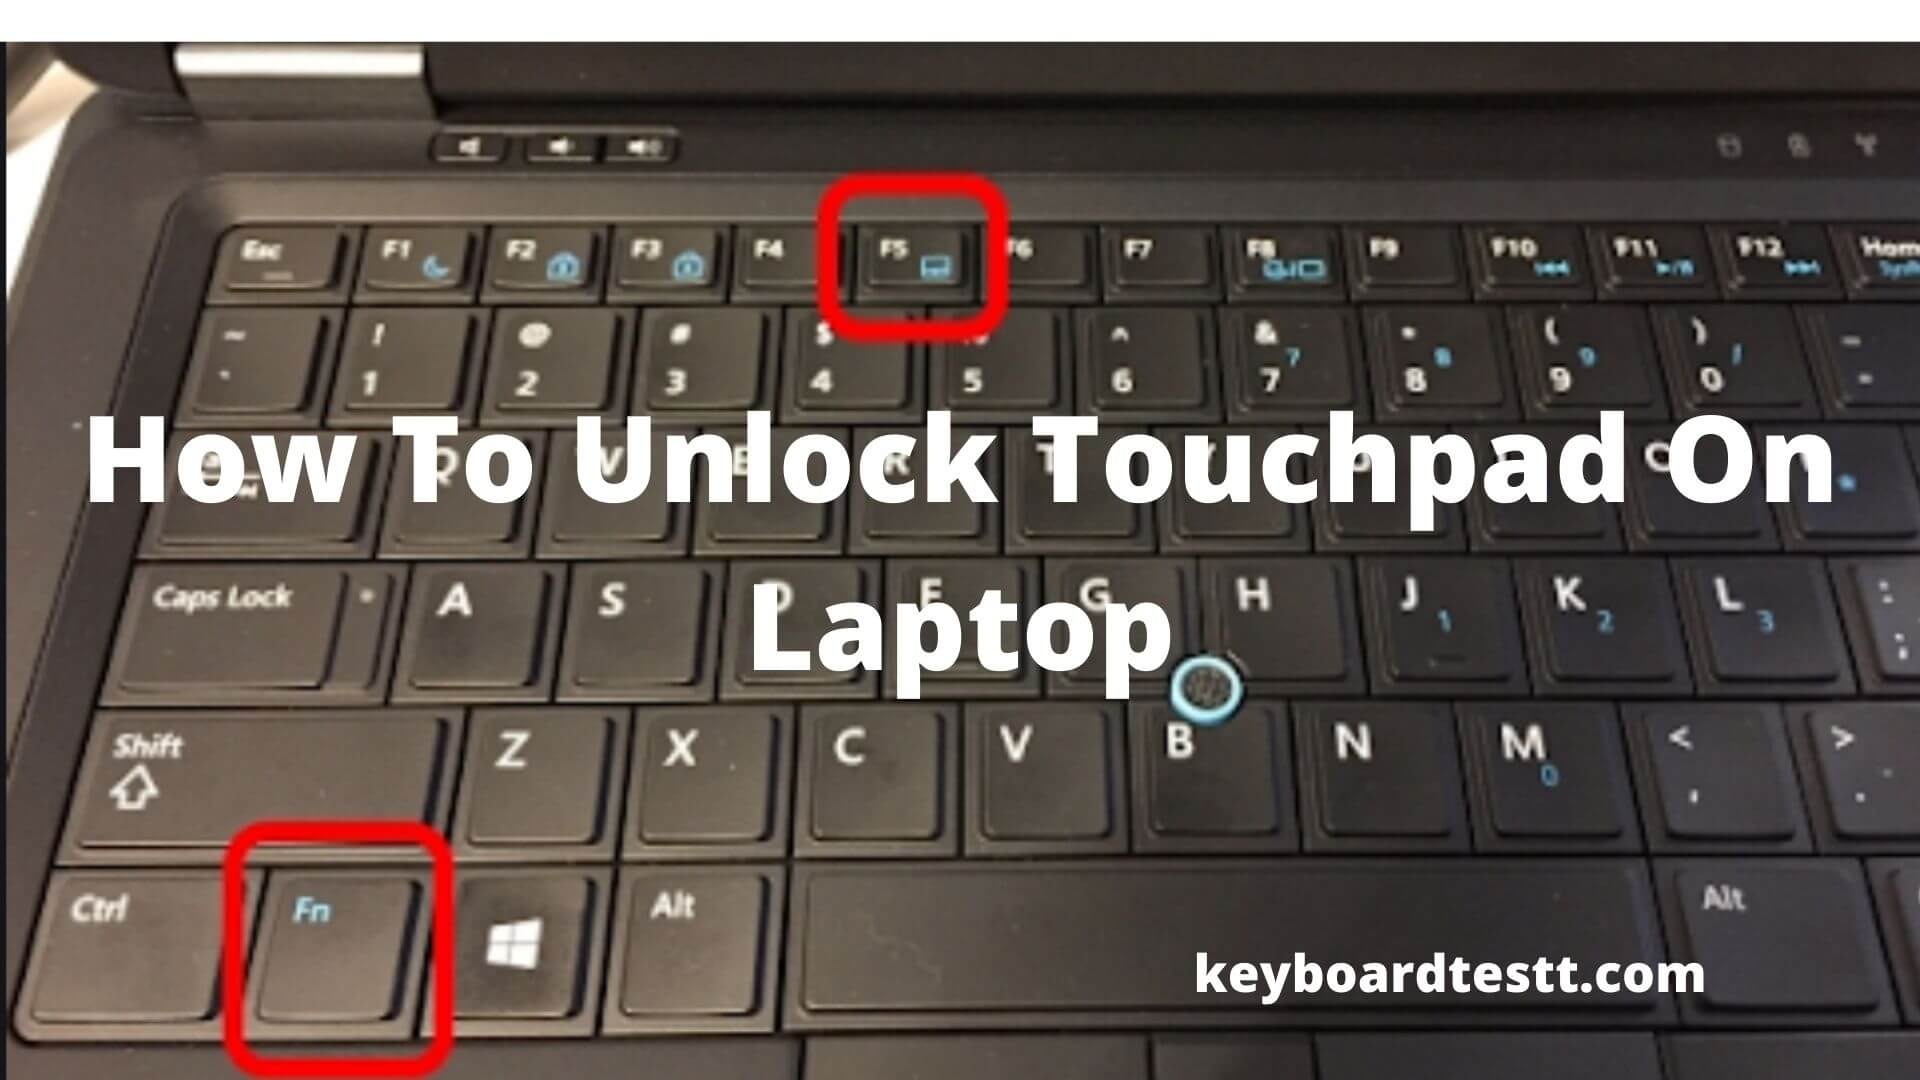 Virus Towing Useful How To Unlock Touchpad On Laptop? - Keyboard Test Online